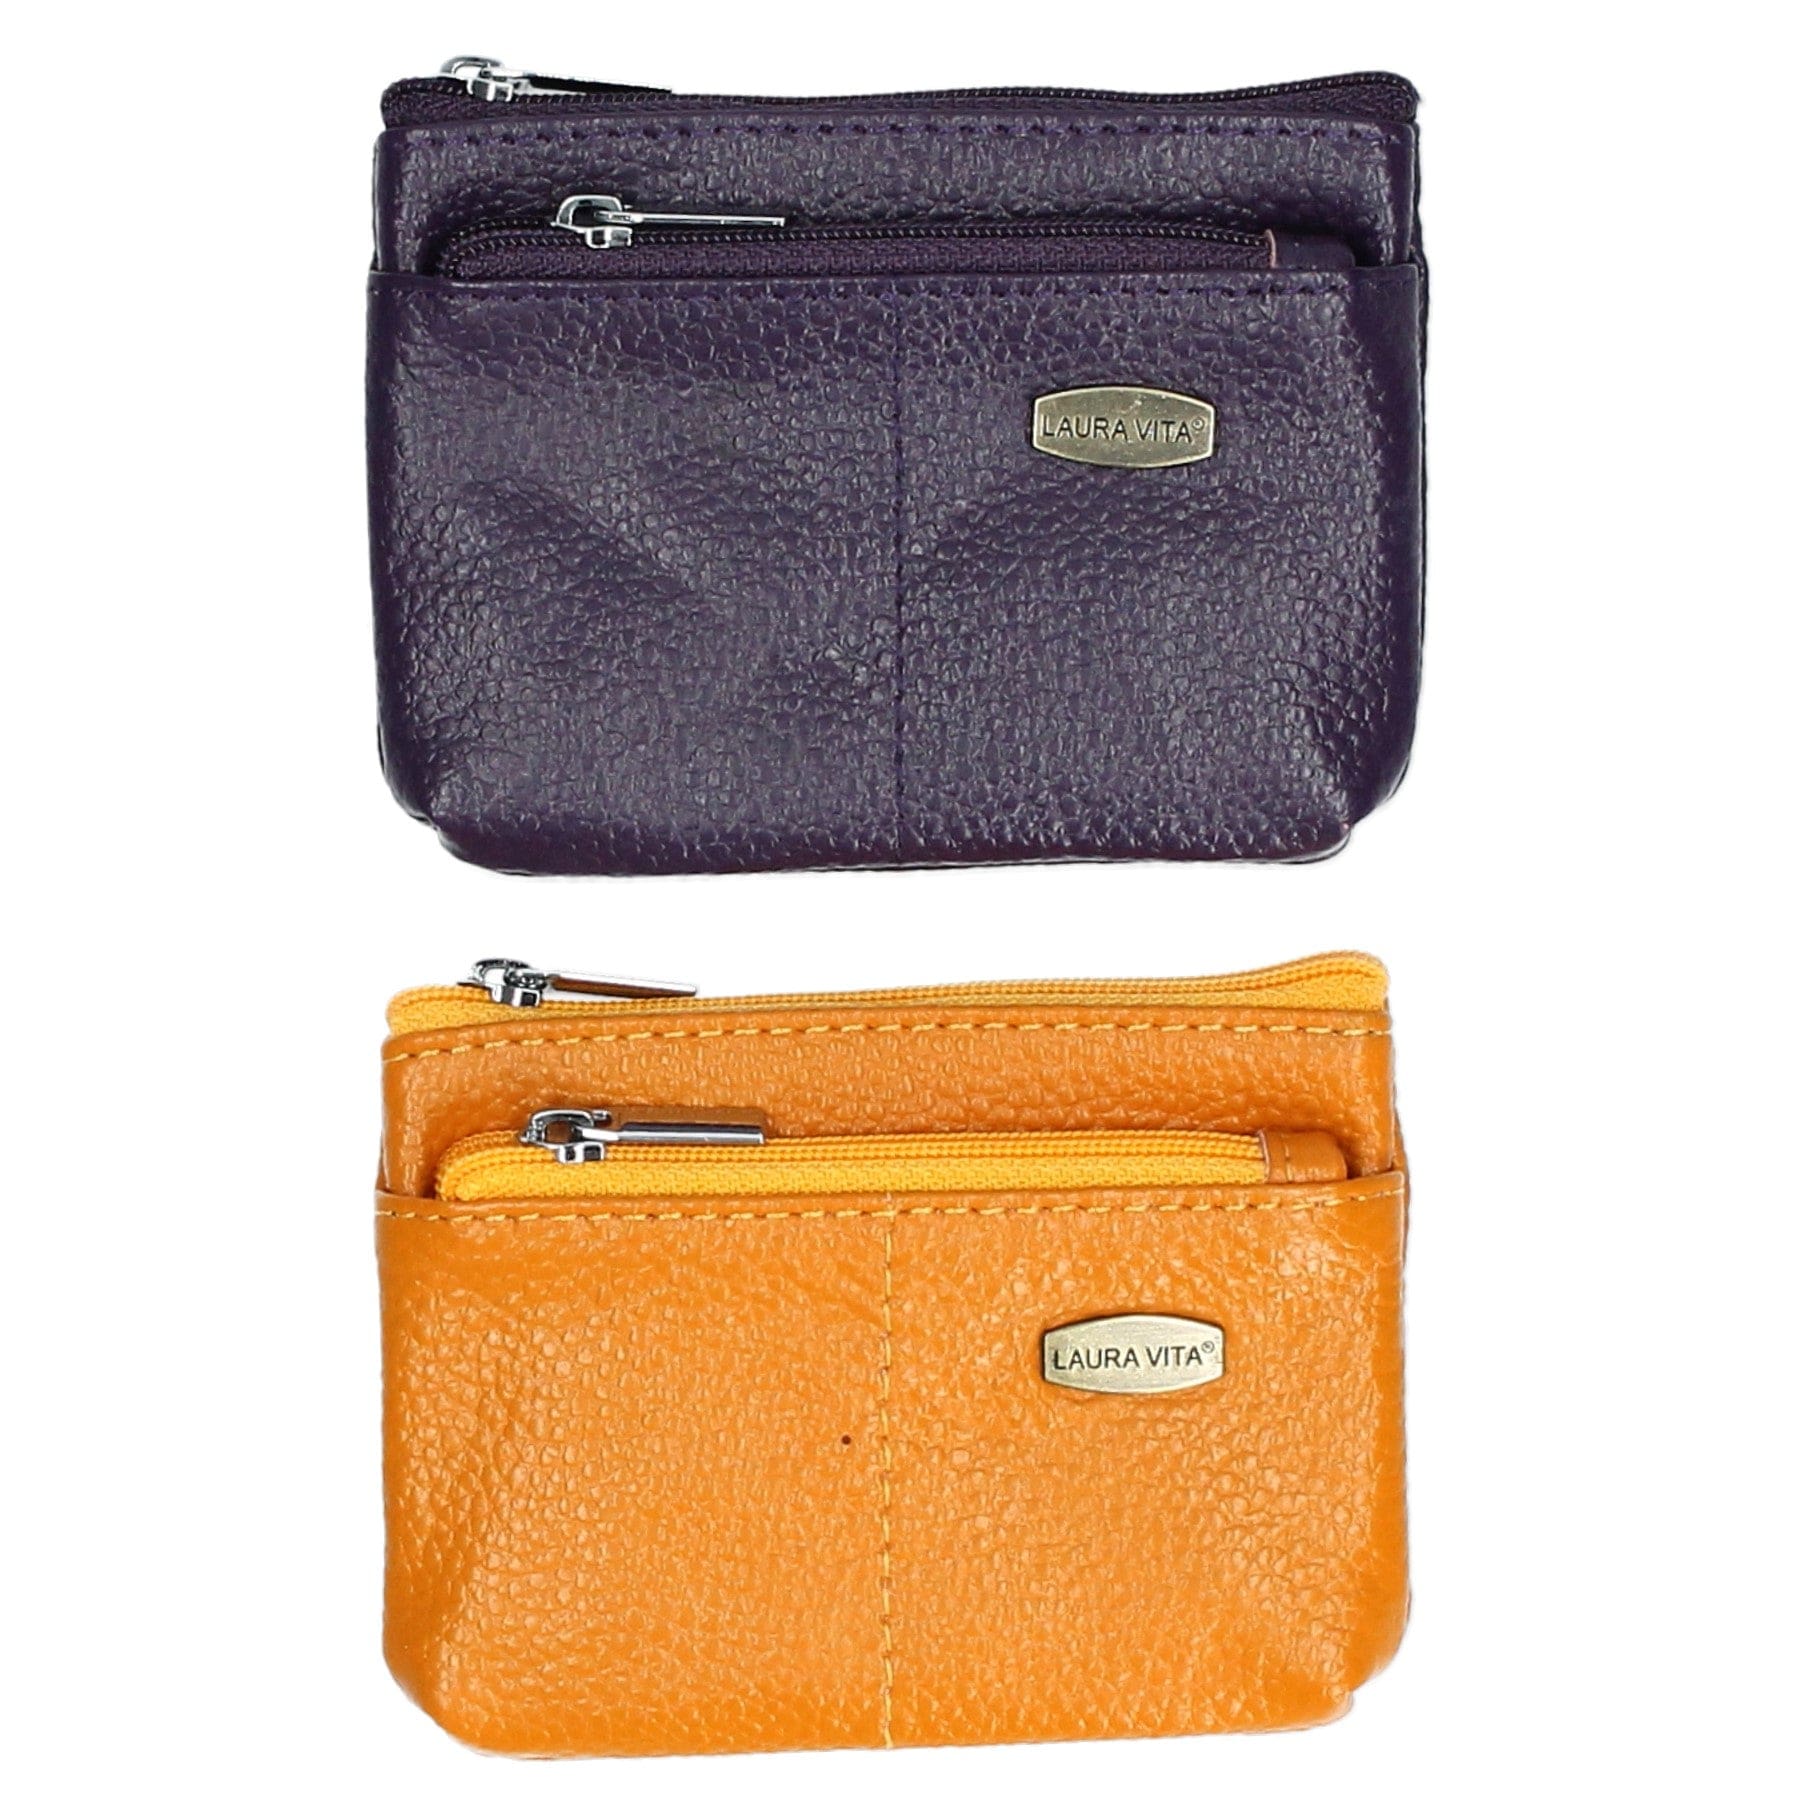 Arlette purse - Small leather goods